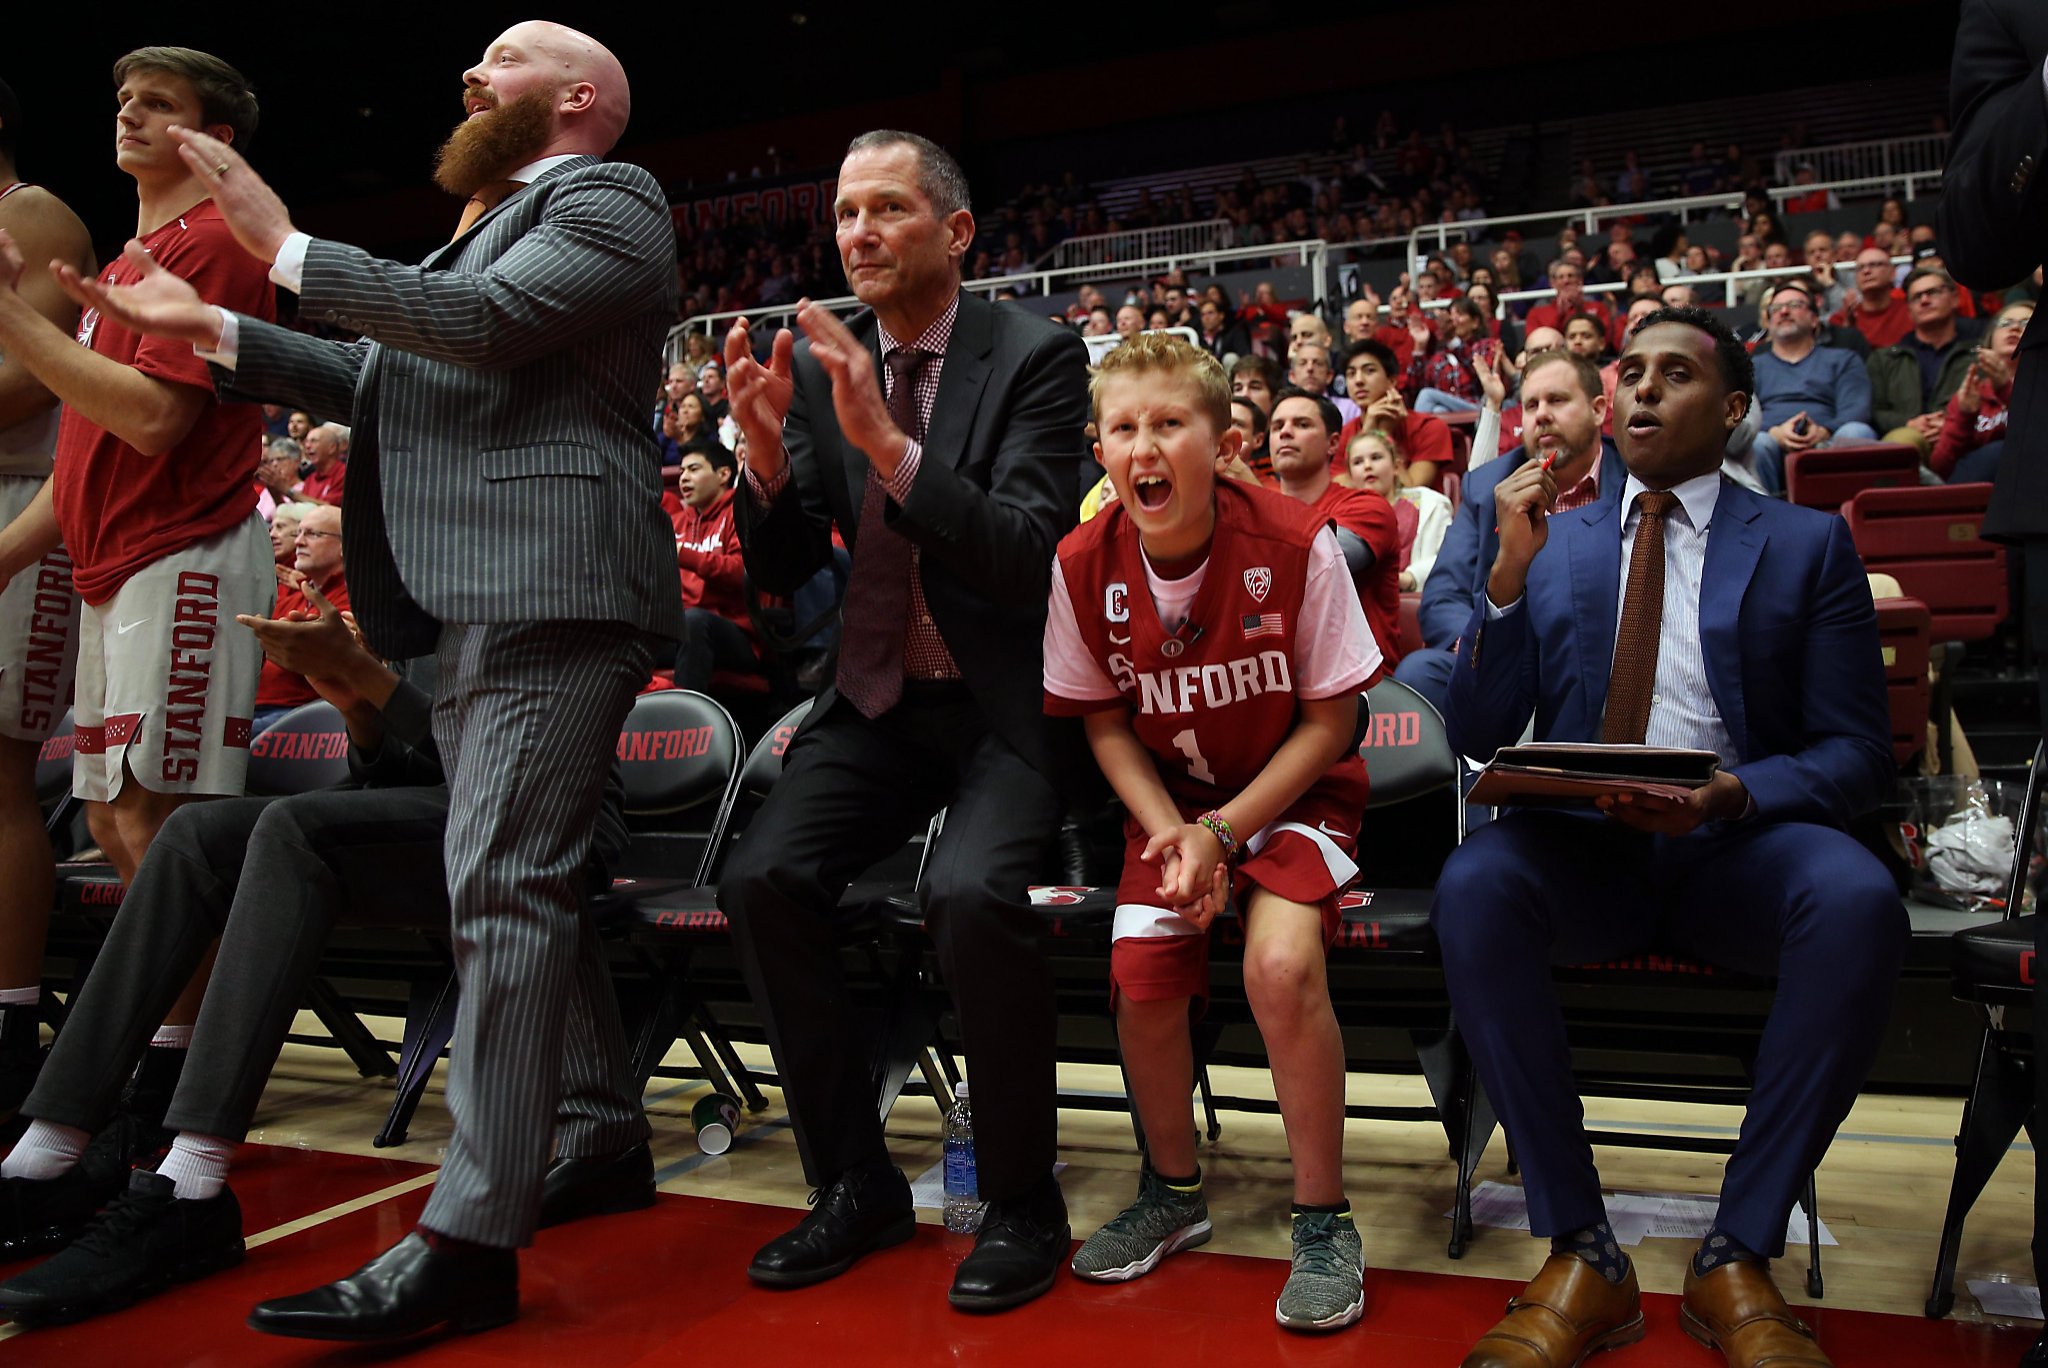 A brave 11-year-old inspires Stanford's basketball players